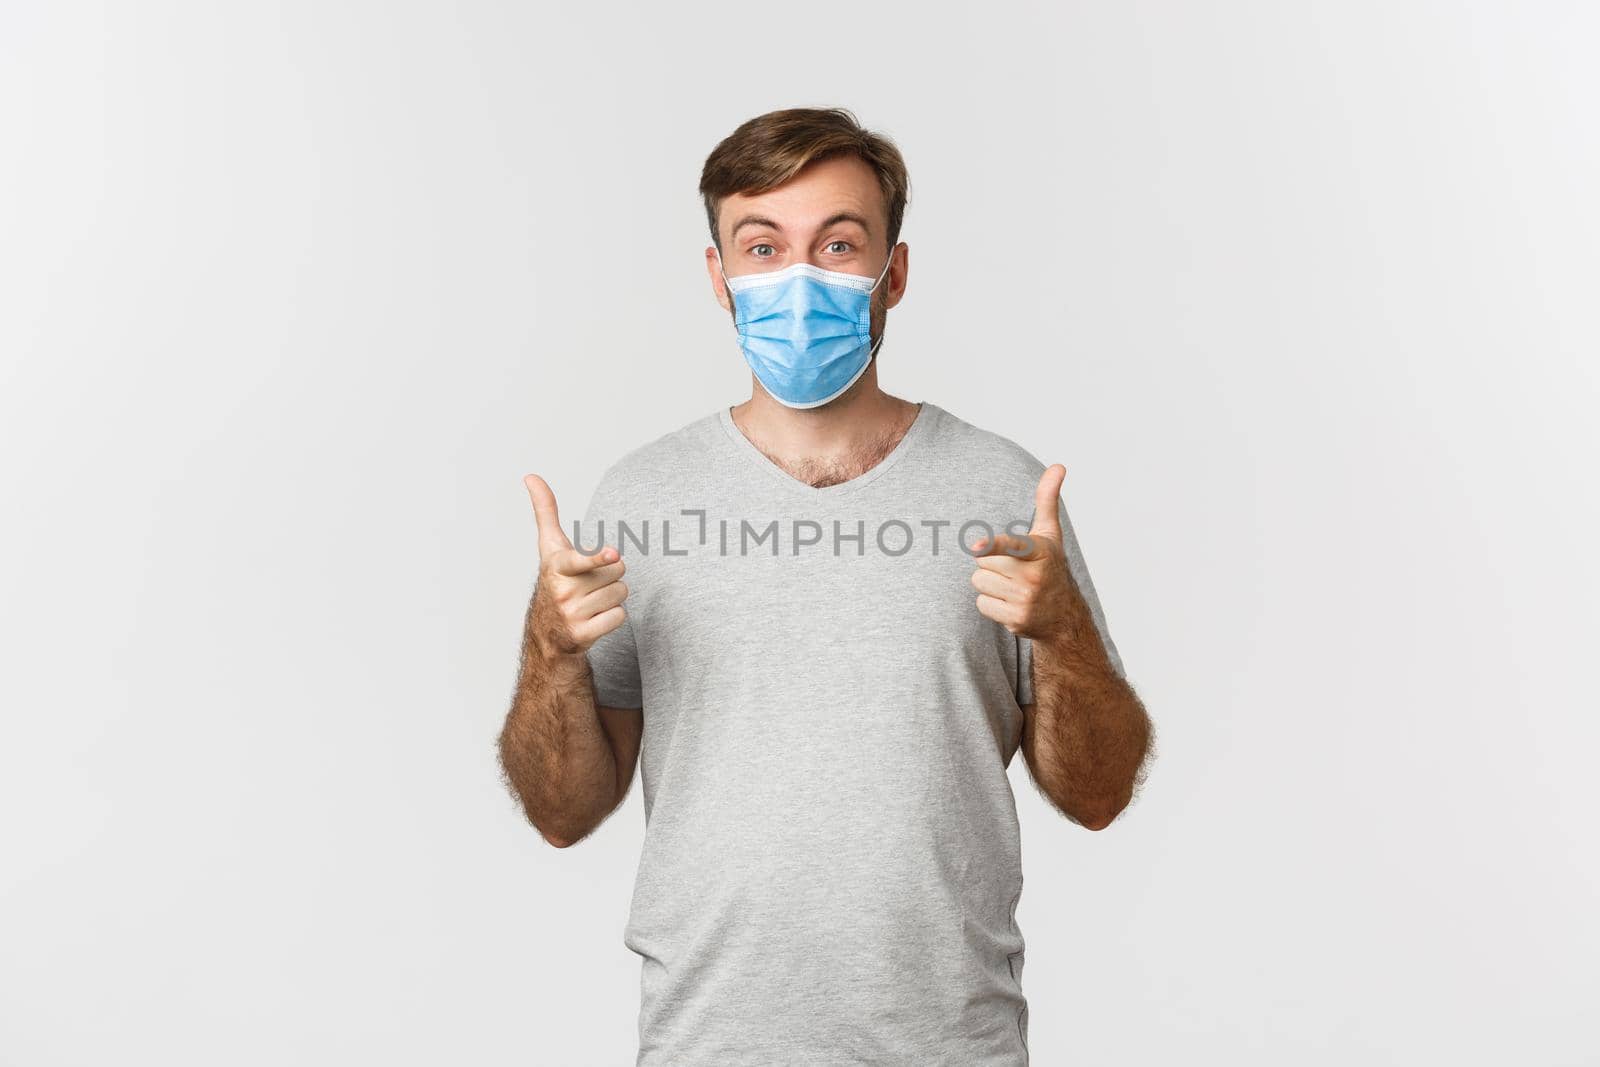 Concept of pandemic, coronavirus and social-distancing. Excited caucasian man in medical mask and gray t-shirt, pointing fingers at camera and praising you, standing over white background.